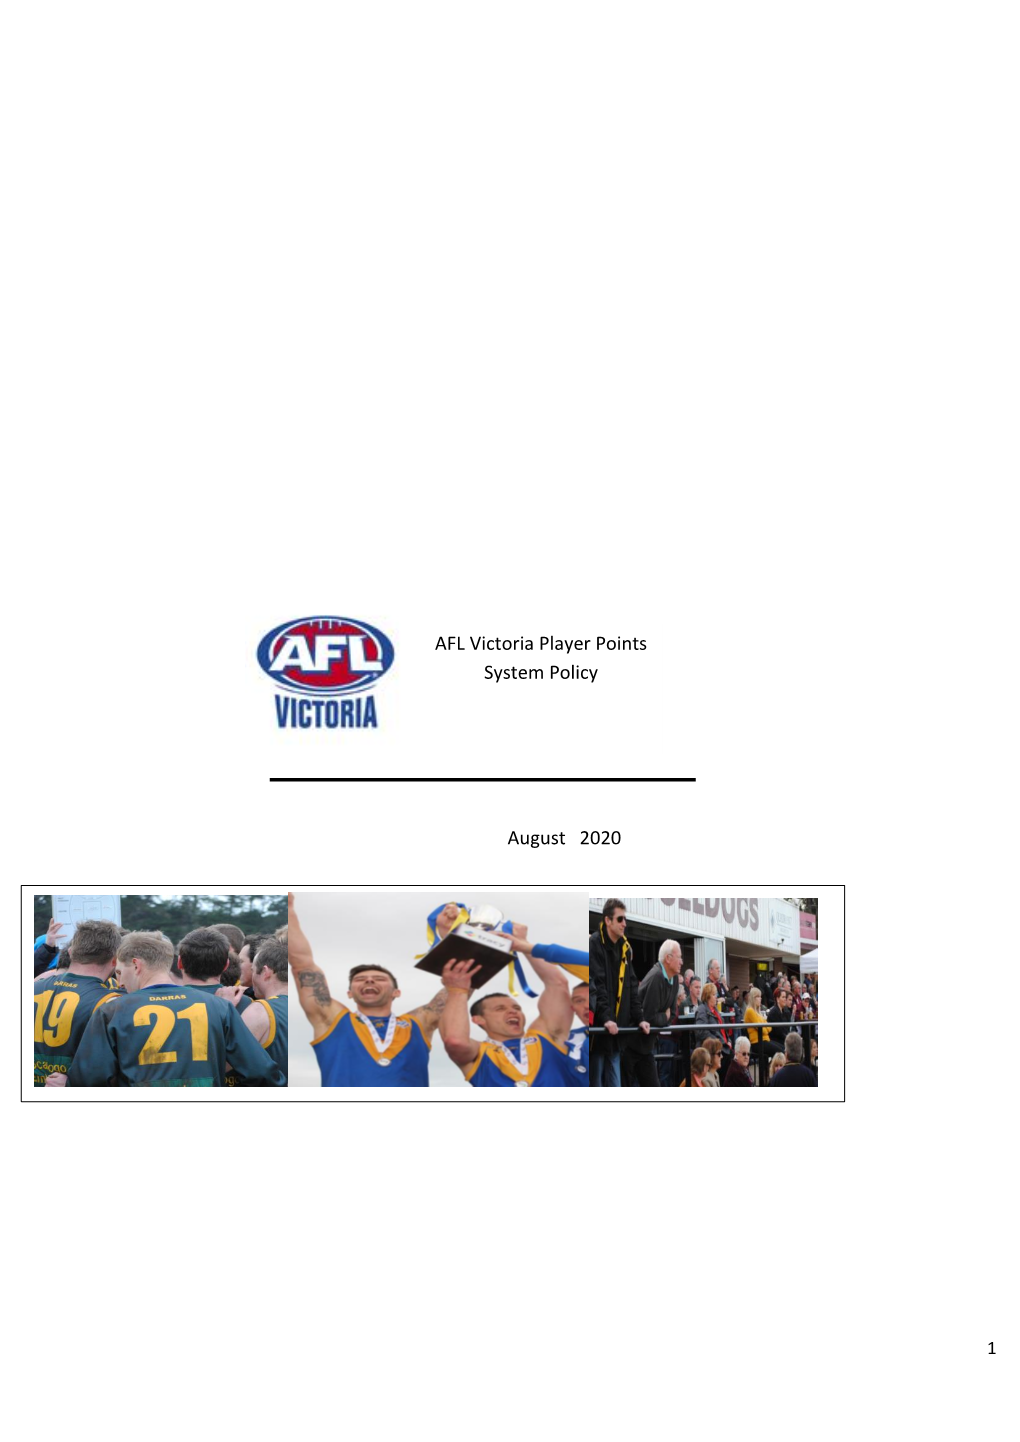 AFL Victoria Player Points System Policy August 2020